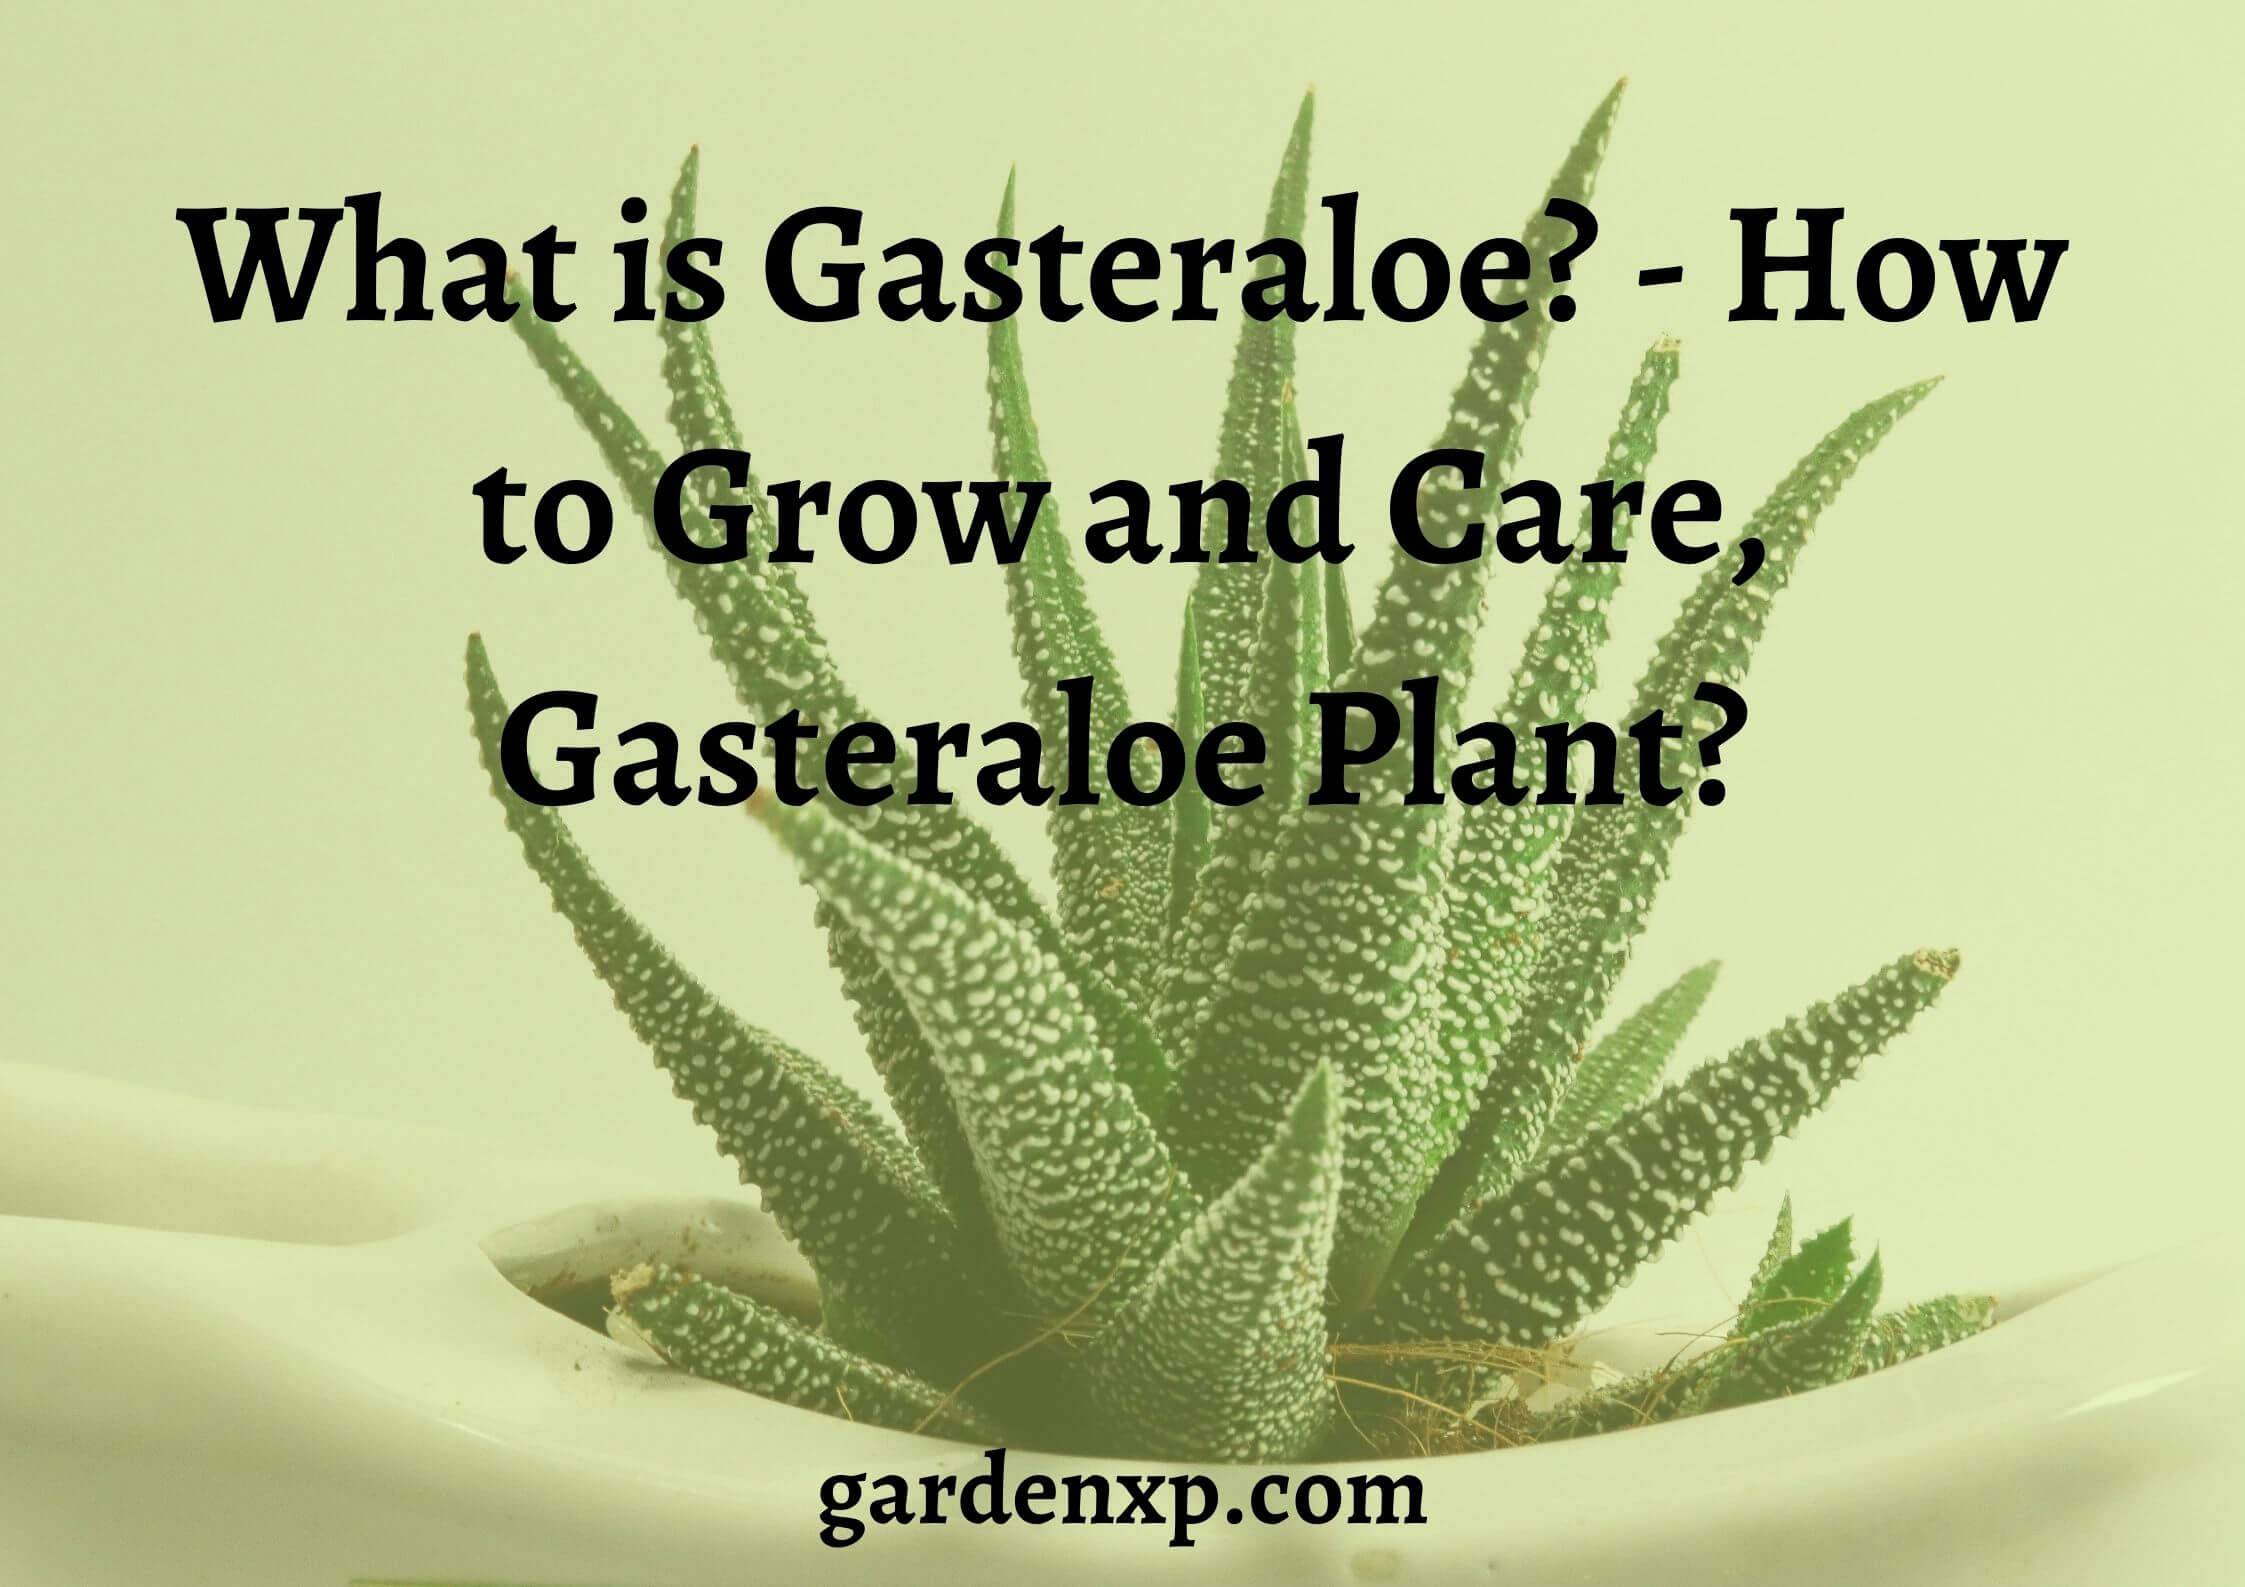 What is Gasteraloe? - How to Grow and Care, Gasteraloe Plant?